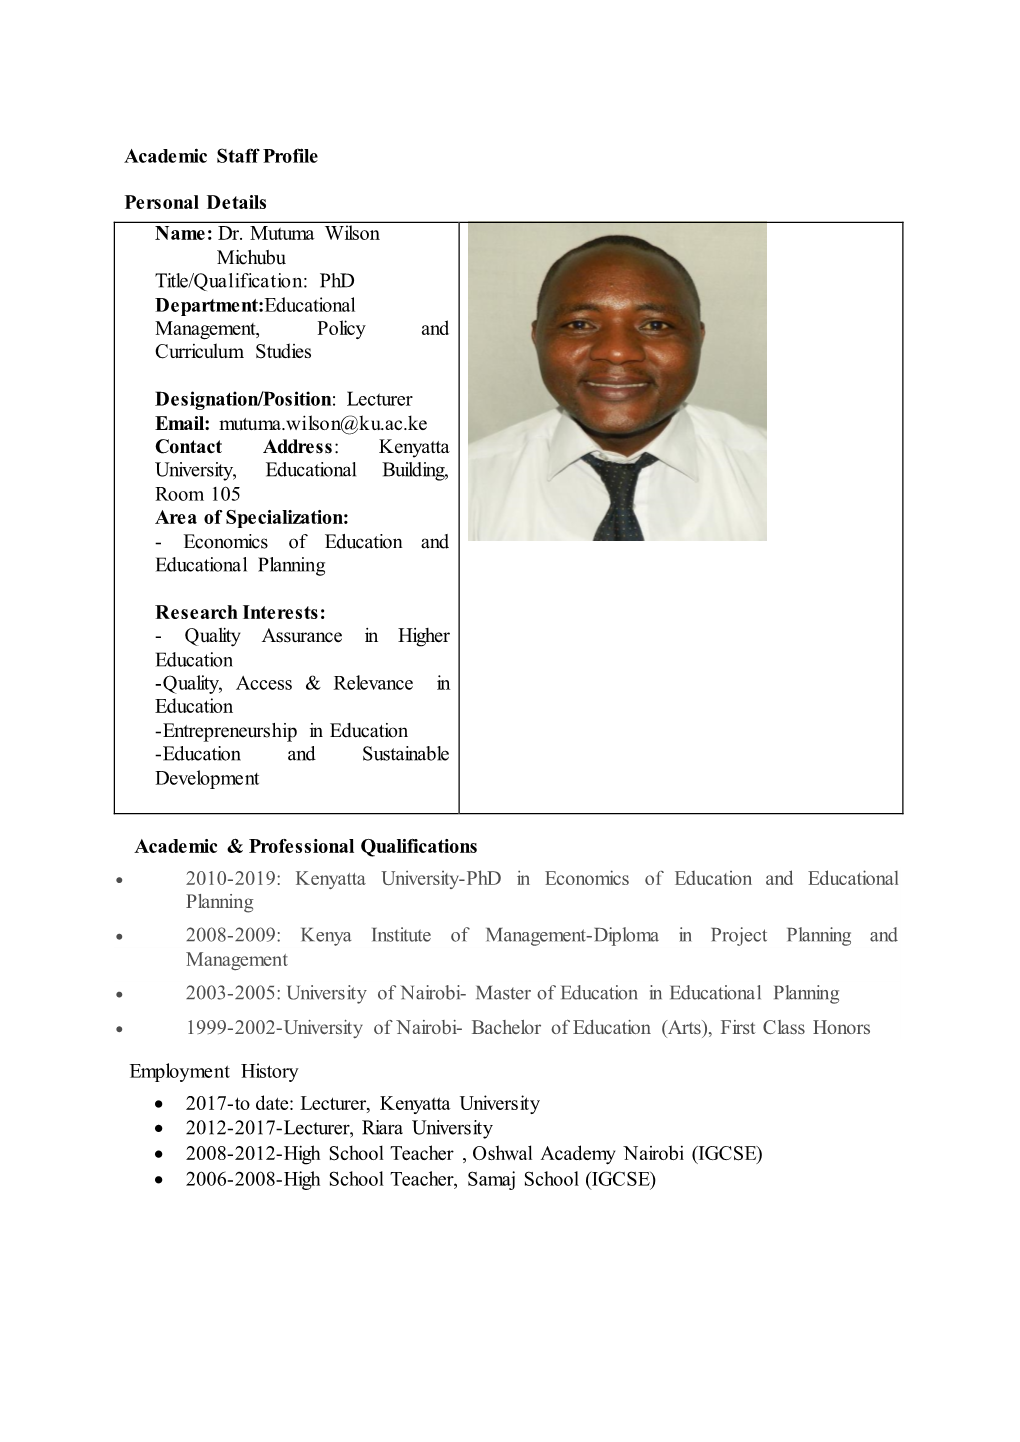 Dr. Mutuma Wilson Michubu Title/Qualification: Phd Department:Educational Management, Policy and Curriculum Studies